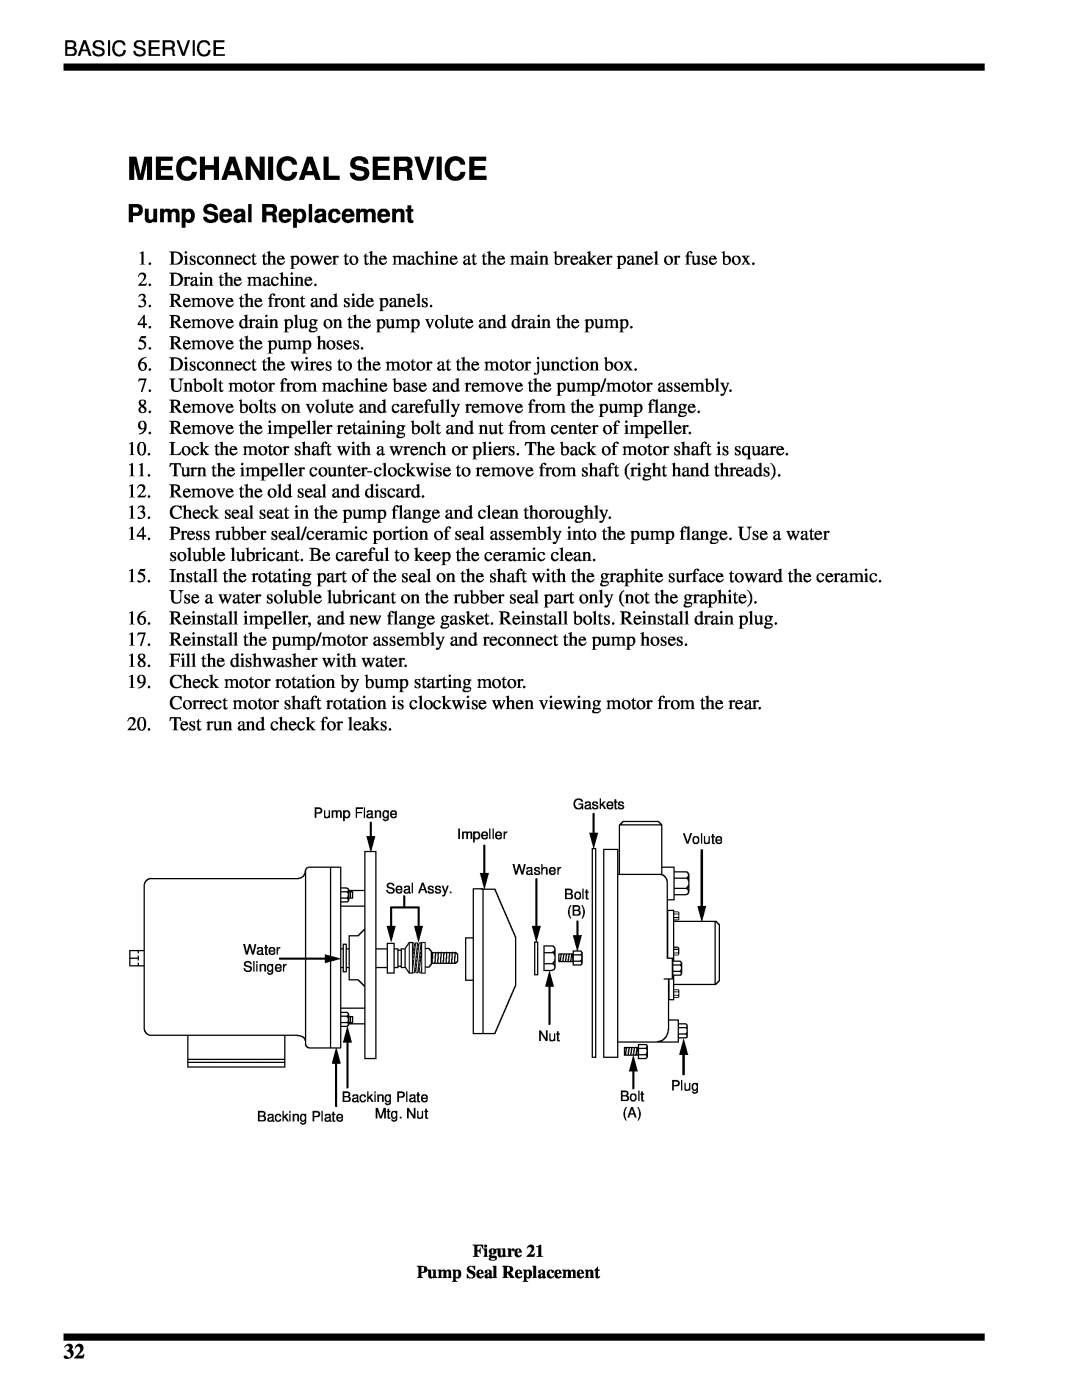 Moyer Diebel MH-6LM3, MH-6NM3, MH-60M3 technical manual Mechanical Service, Pump Seal Replacement, Basic Service 